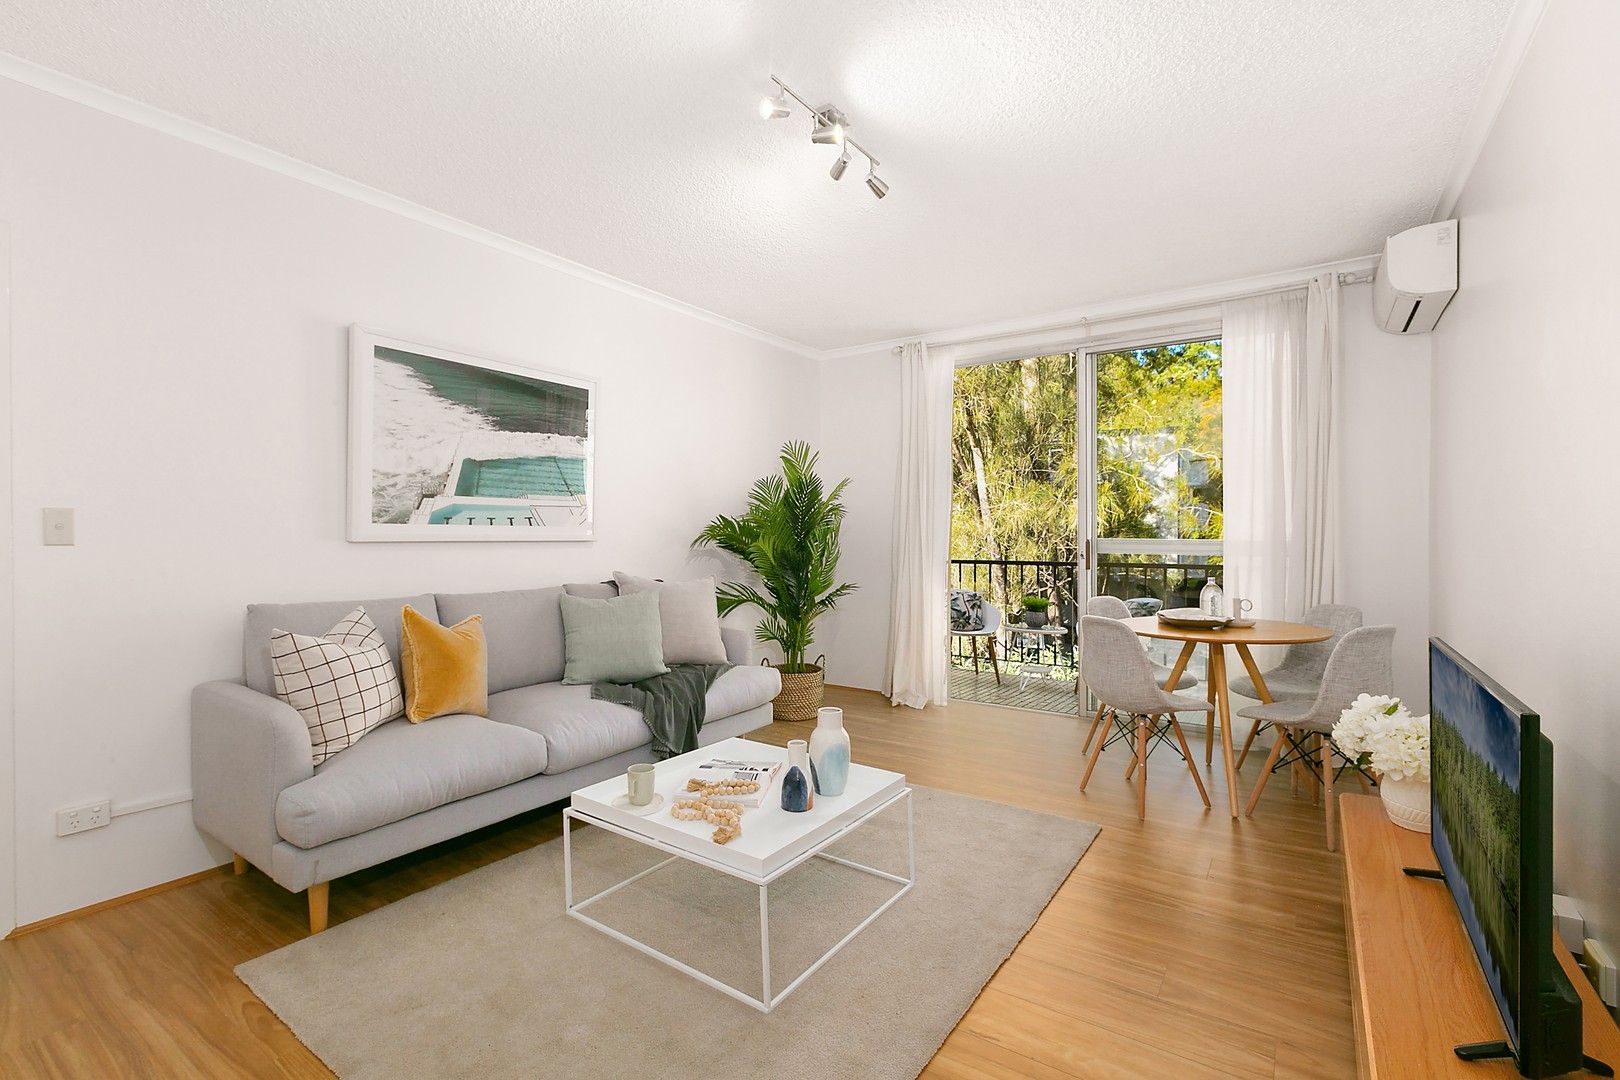 2 bedrooms Apartment / Unit / Flat in 14/4 Stokes Street LANE COVE NSW, 2066